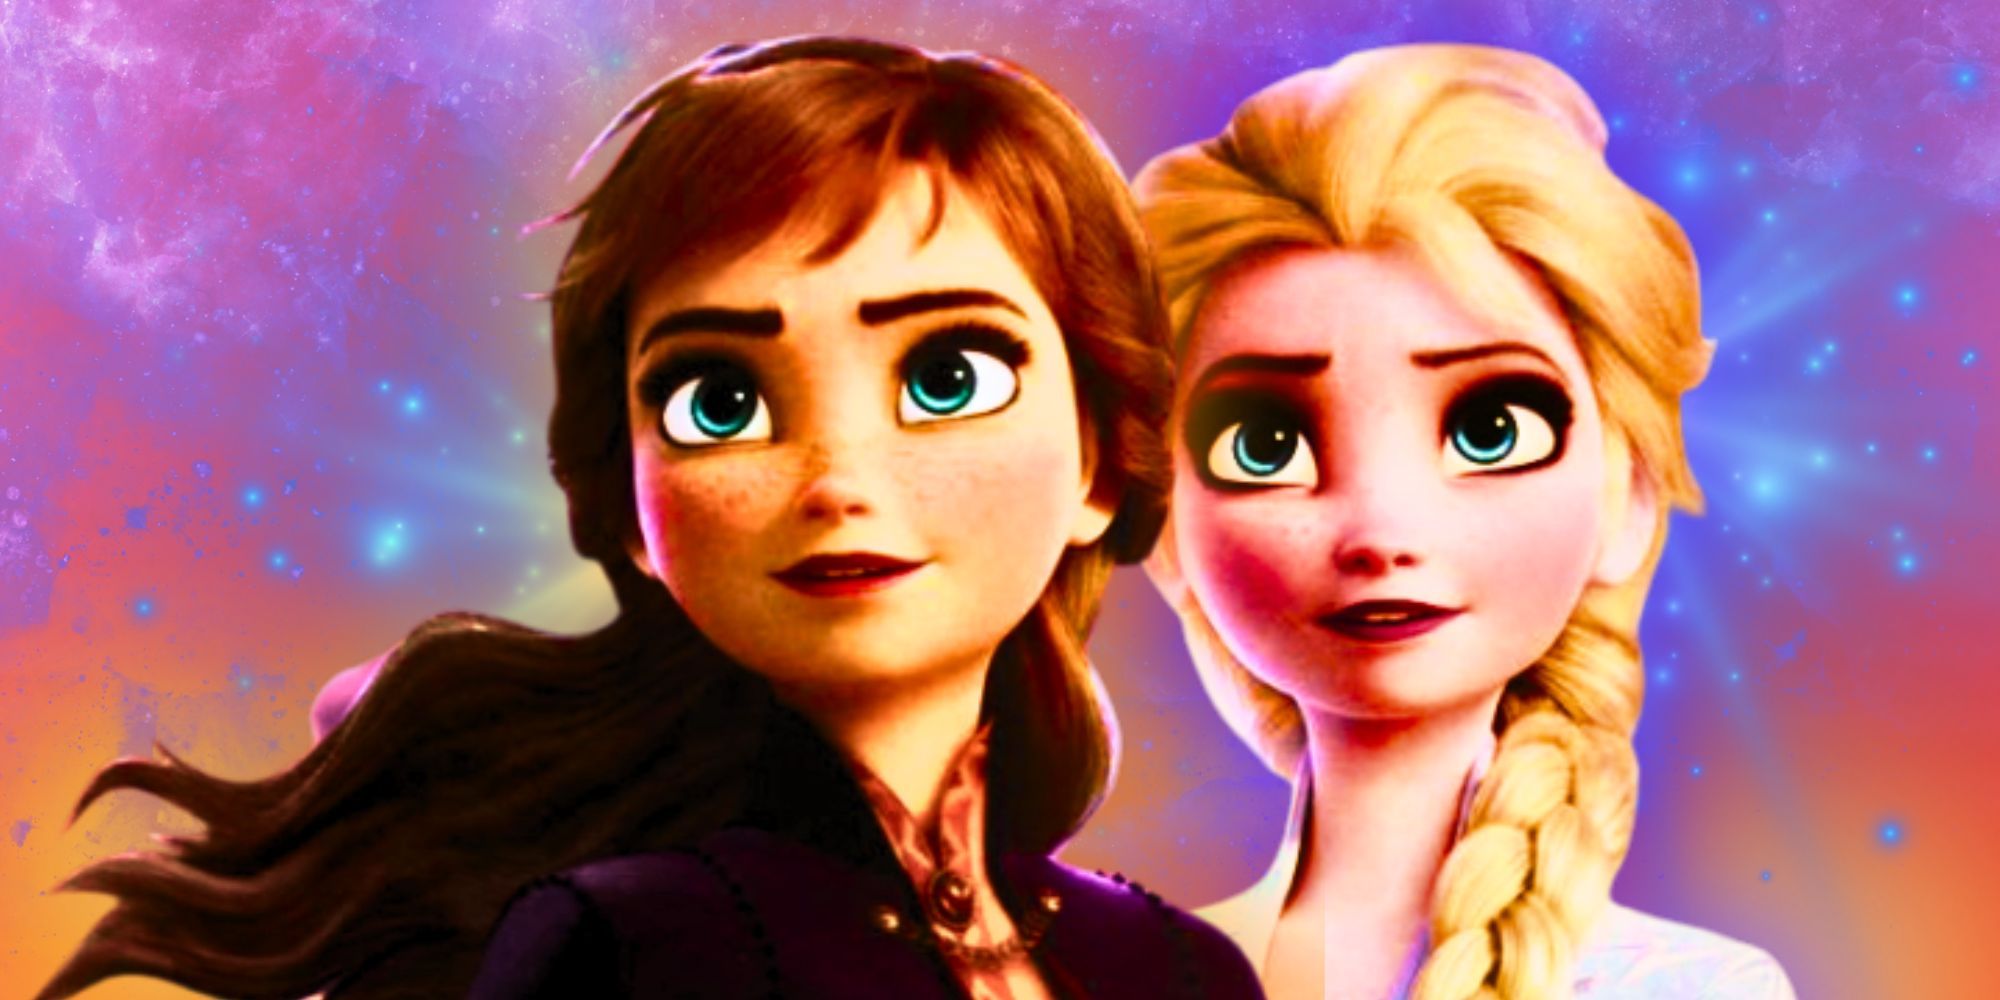 Anna and Elsa from Frozen in front of a starlit background